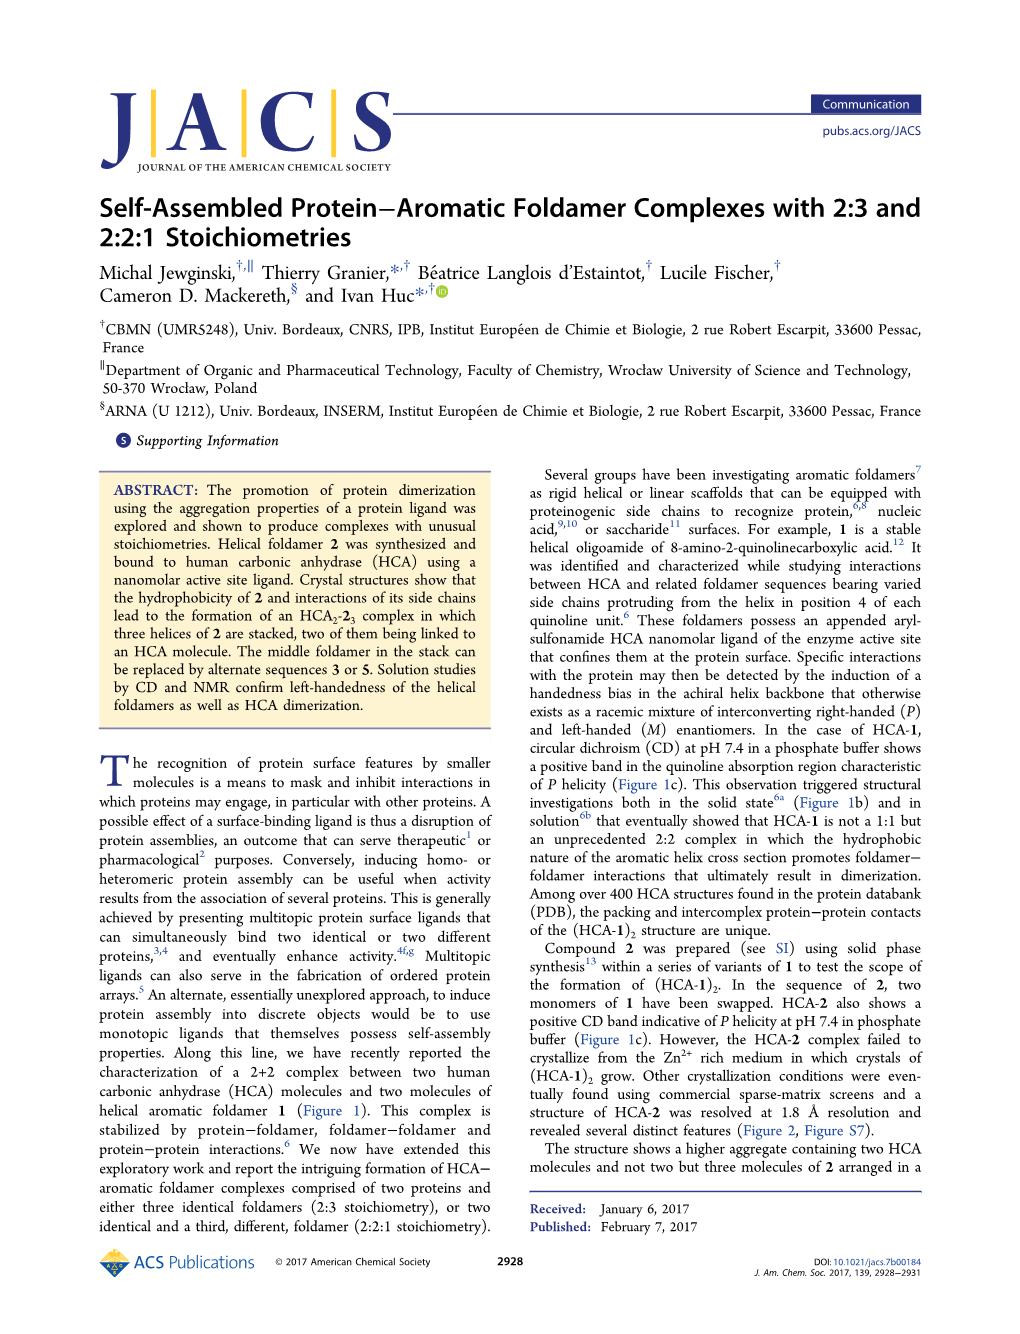 Self-Assembled Protein−Aromatic Foldamer Complexes with 2:3 And